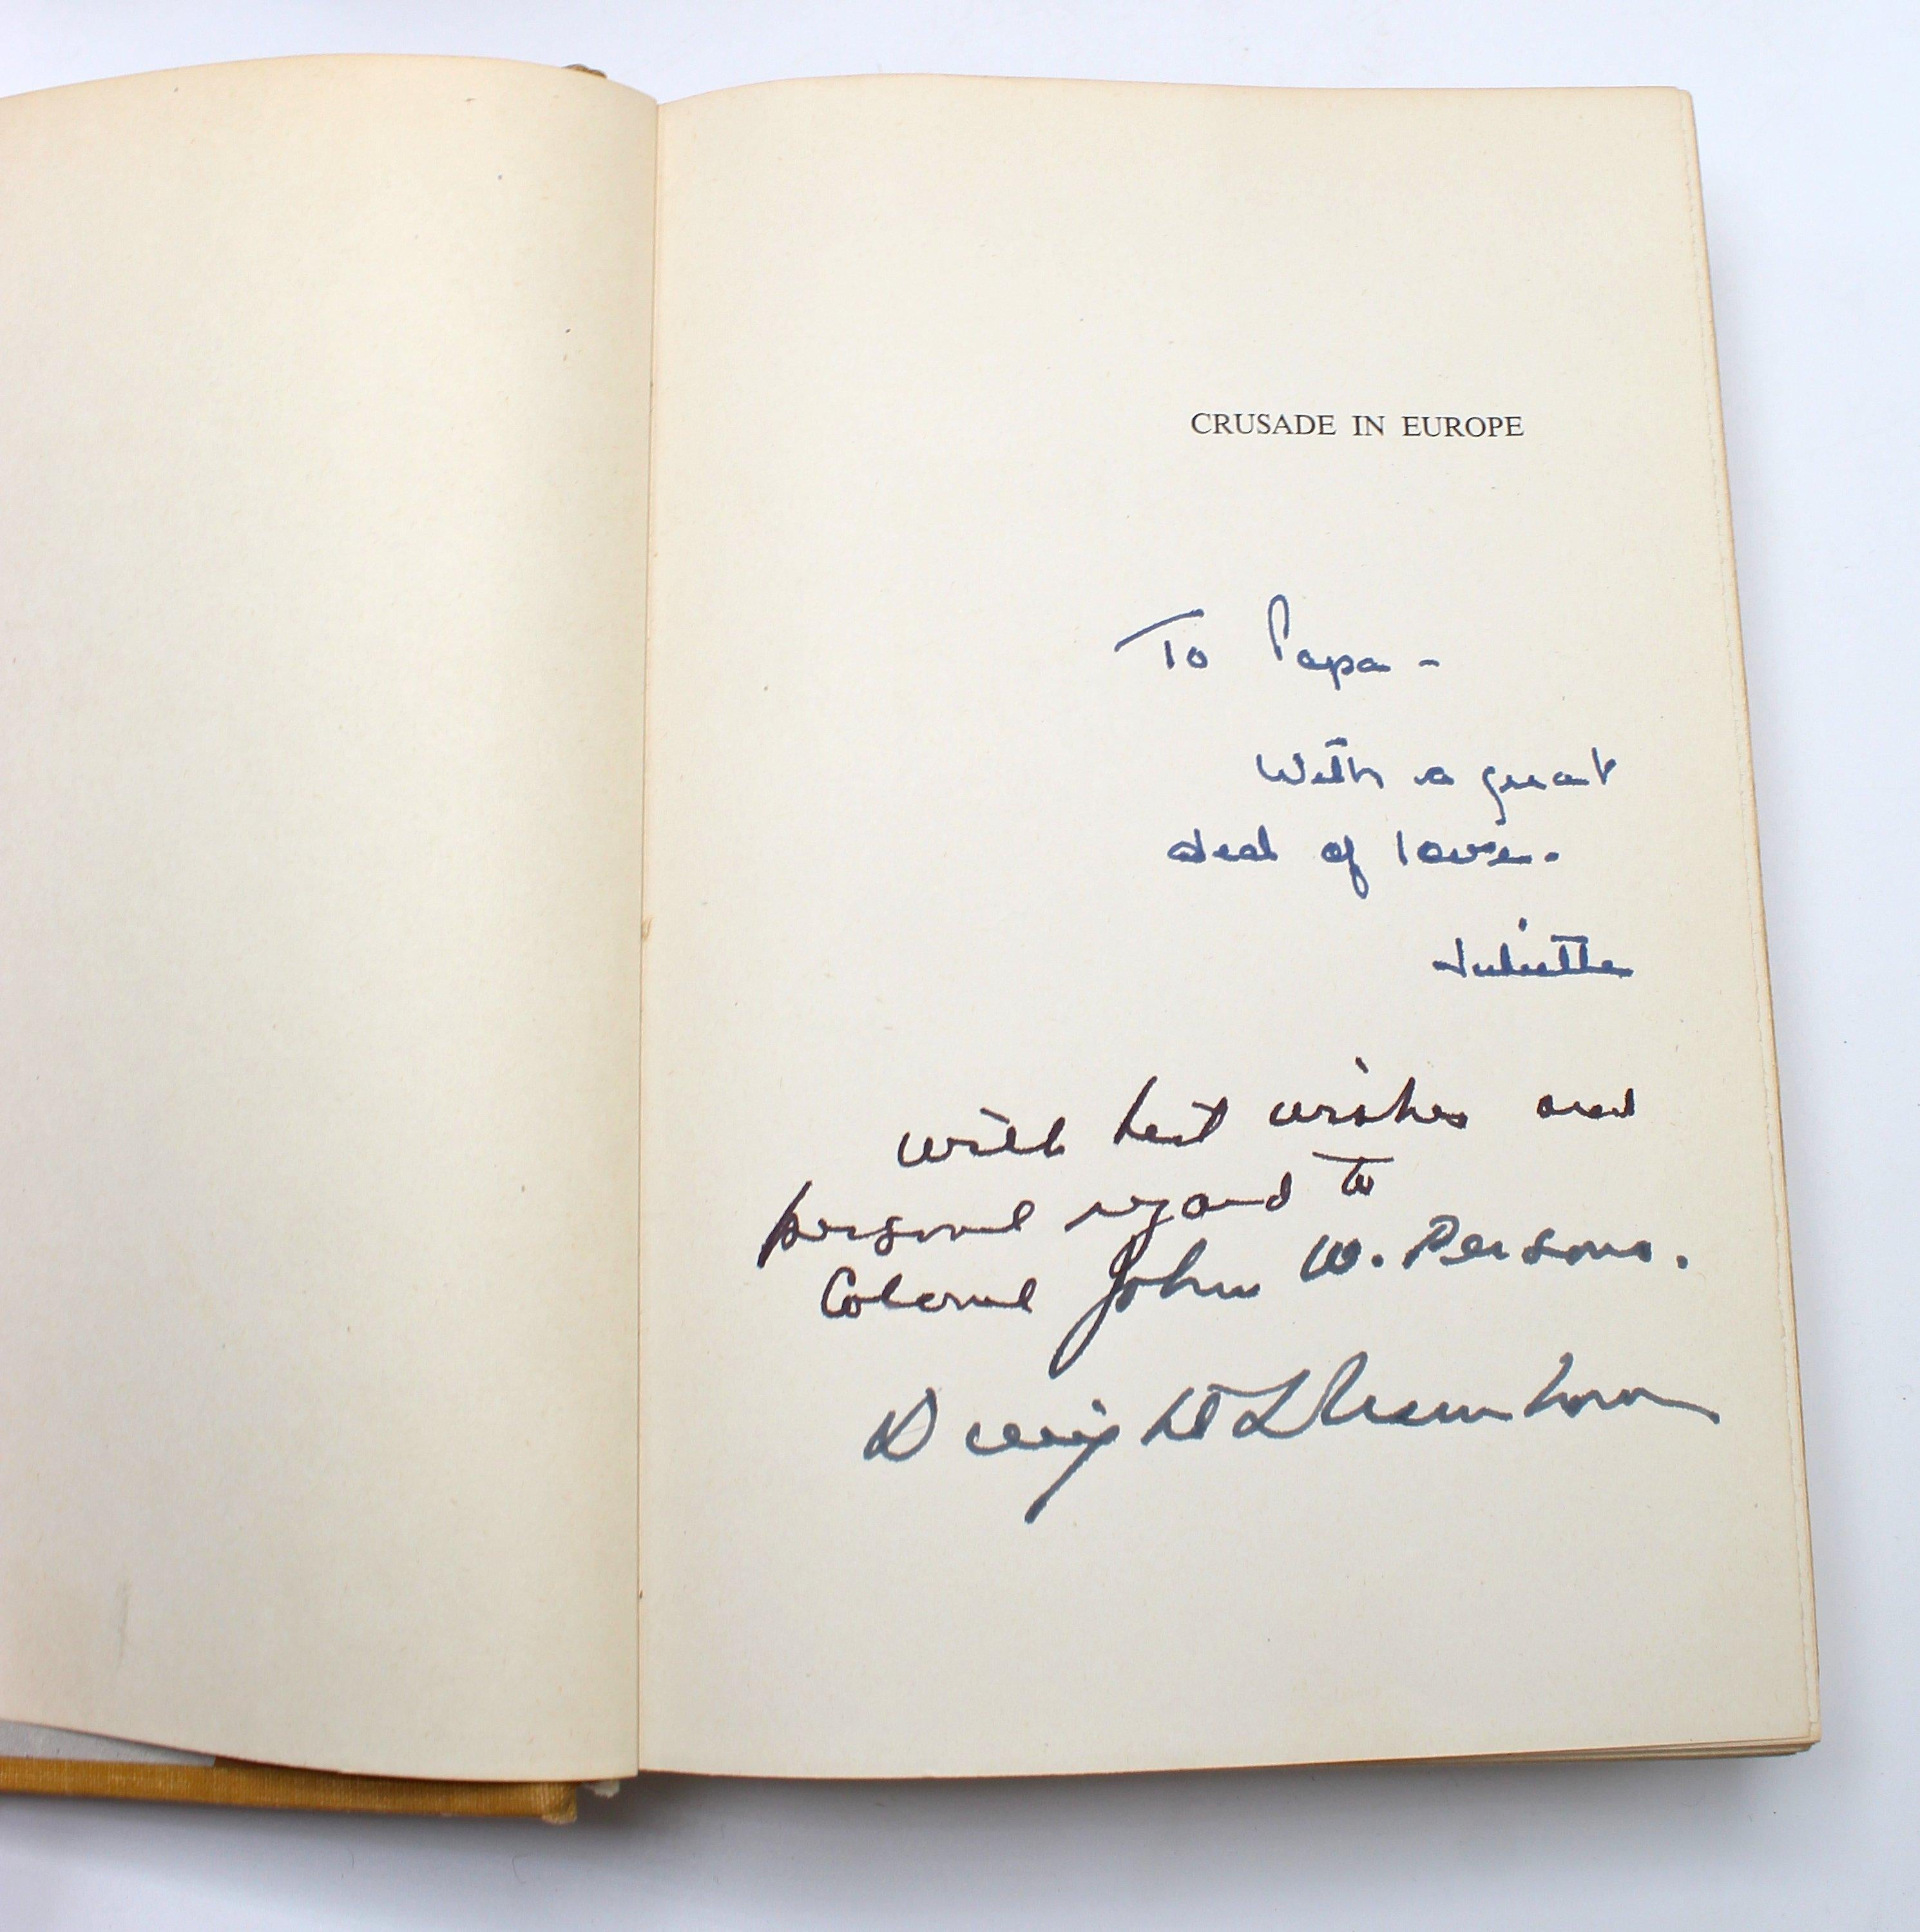 Eisenhower, Dwight D. Crusade in Europe. Garden City: Doubleday & Company, Inc., 1948. First edition, second state printing. Signed and Inscribed by Eisenhower to Major General John W. Persons on half title page. Octavo, in its original first state